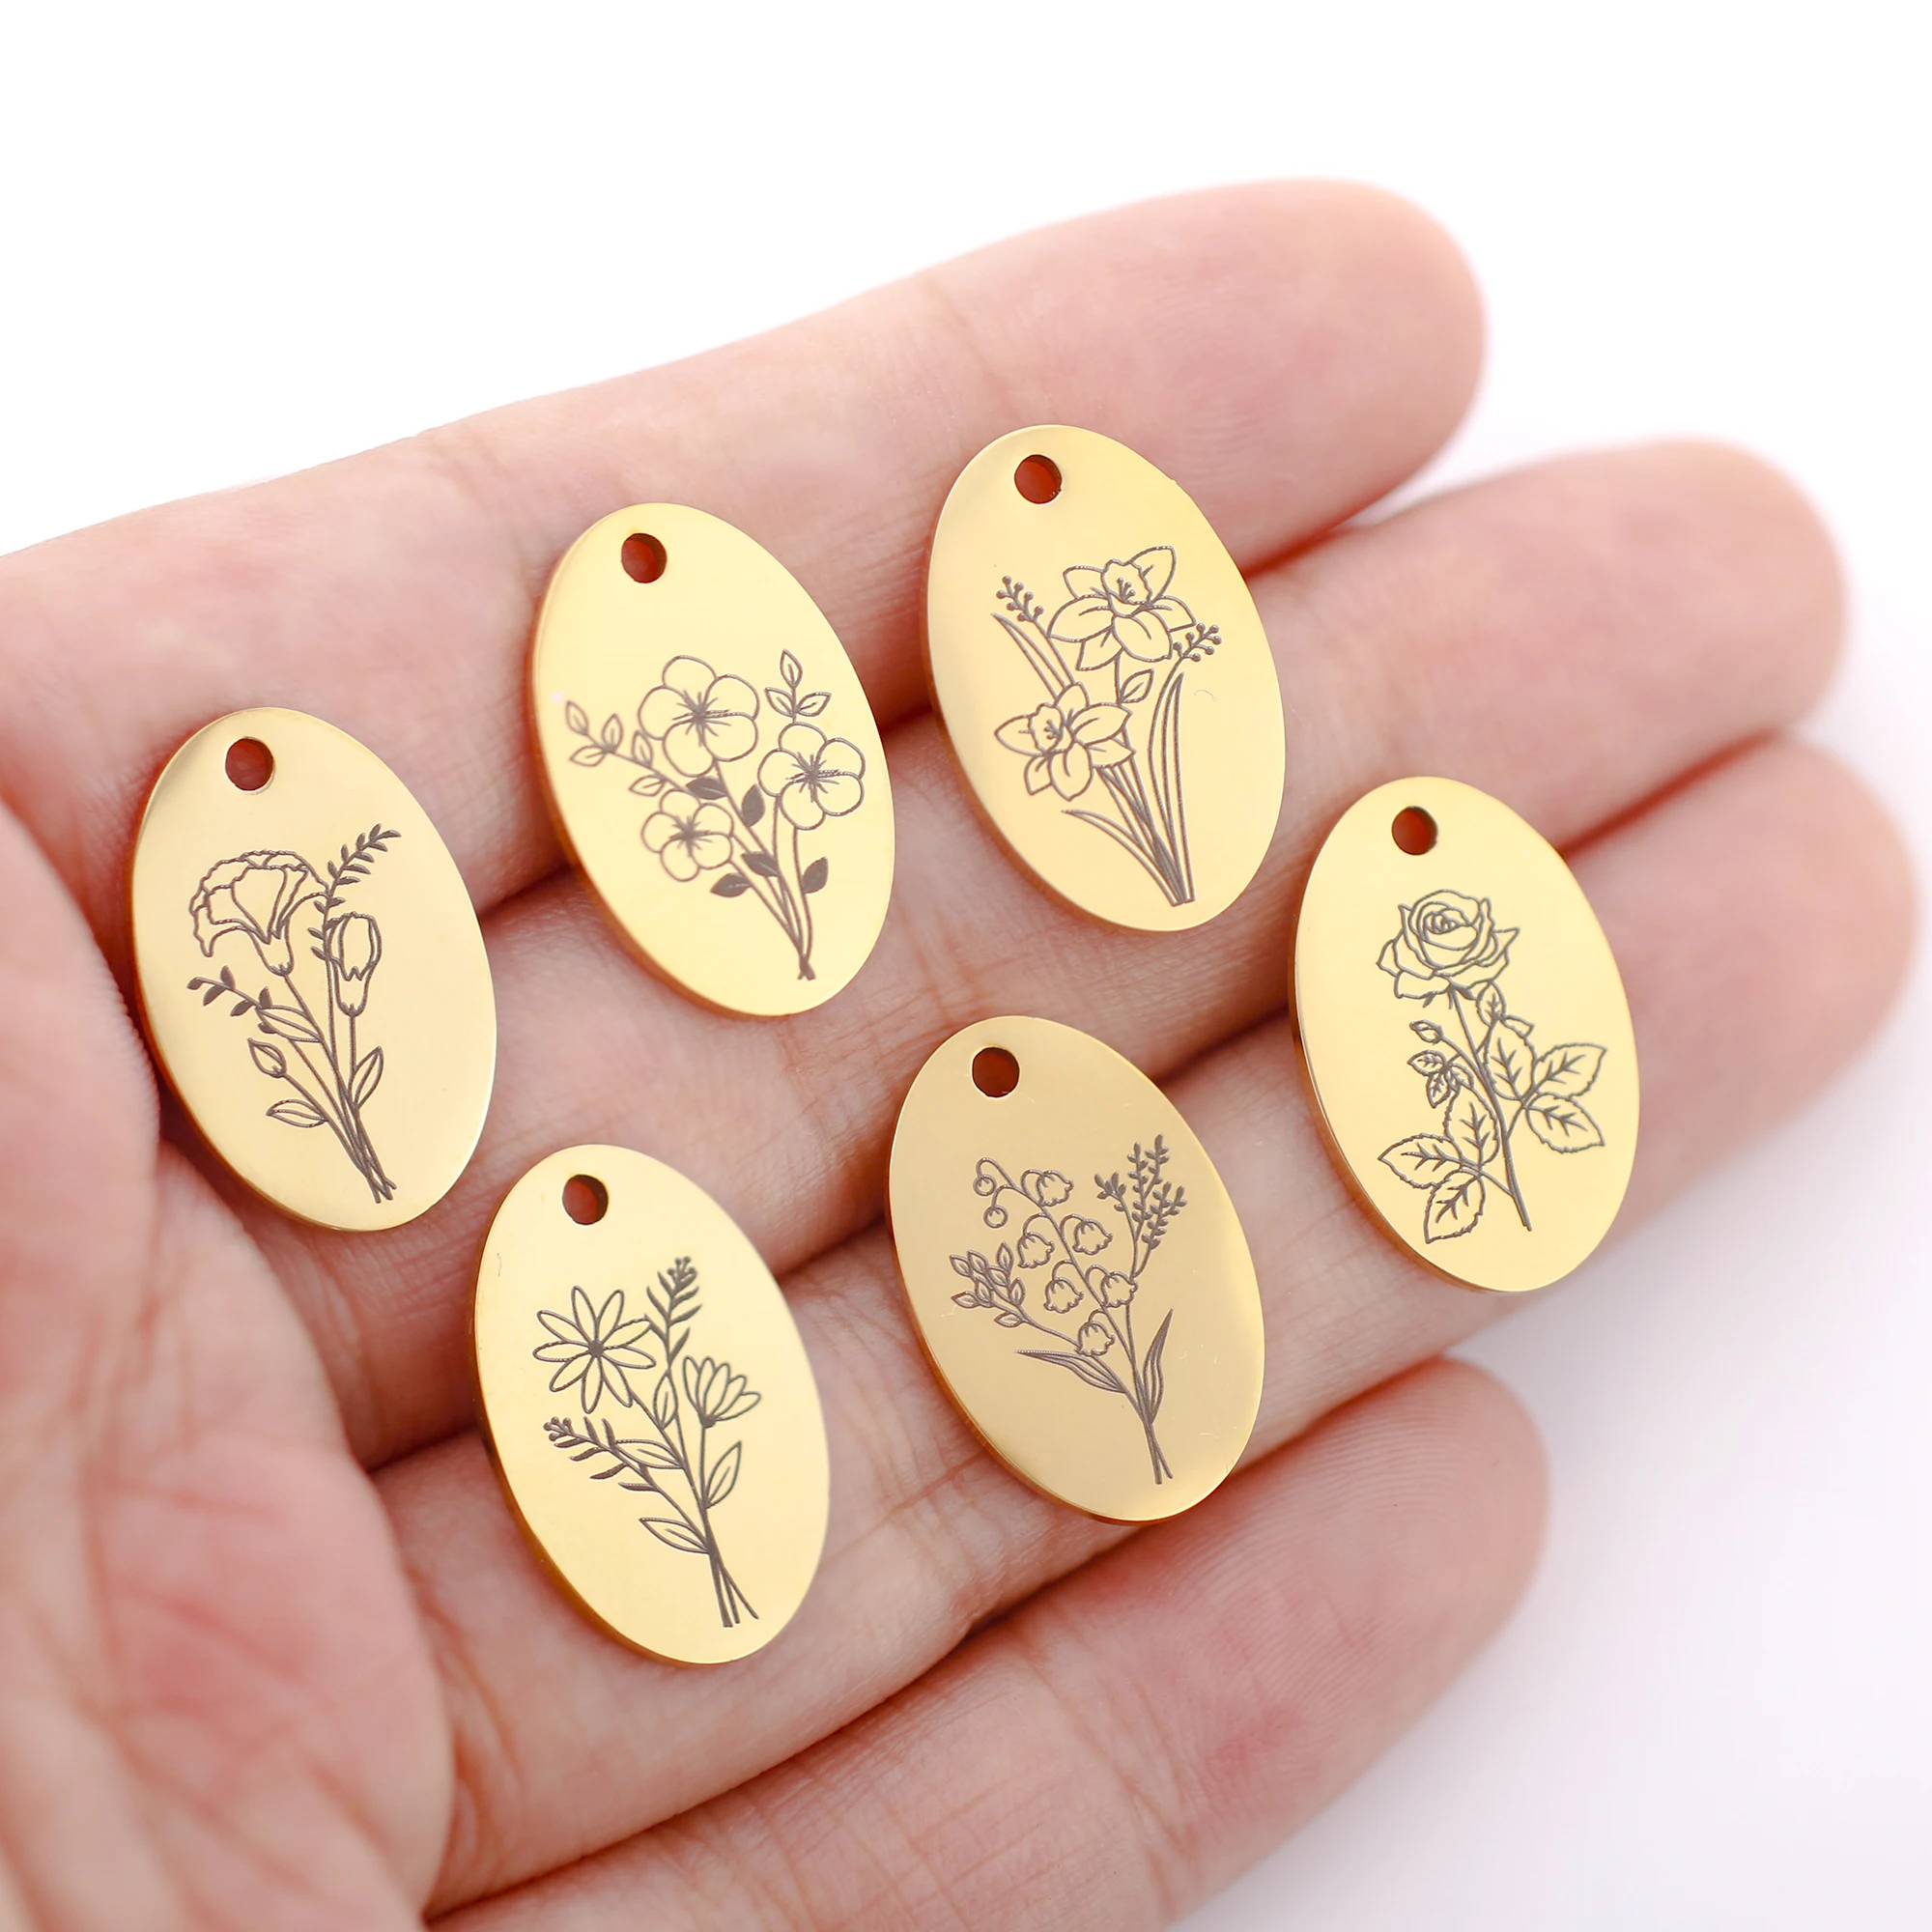 

5Pcs Oval Birth Month Flower Pendants Stainless Steel Dainty Floral Disc Charms Lotus/Marigold/Rose Diy Necklace Jewelry Making